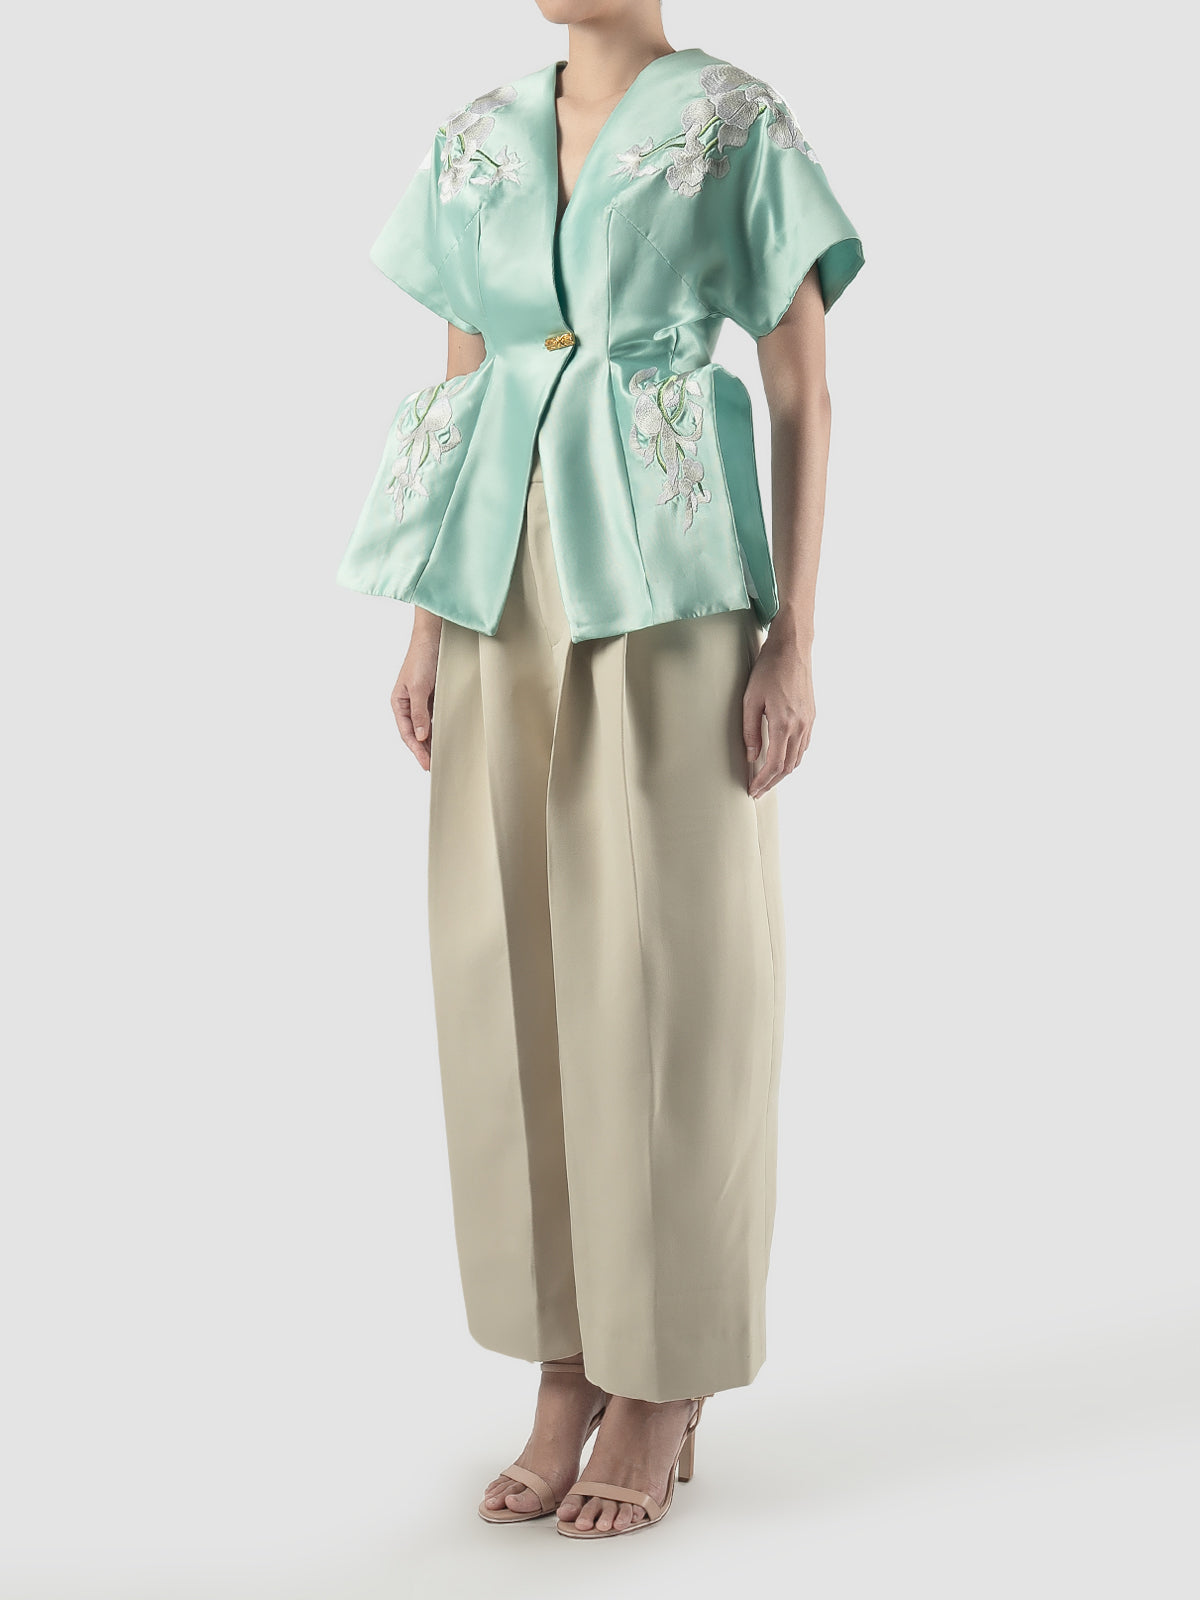 Mint Signature Kimono with embroidery and gold button